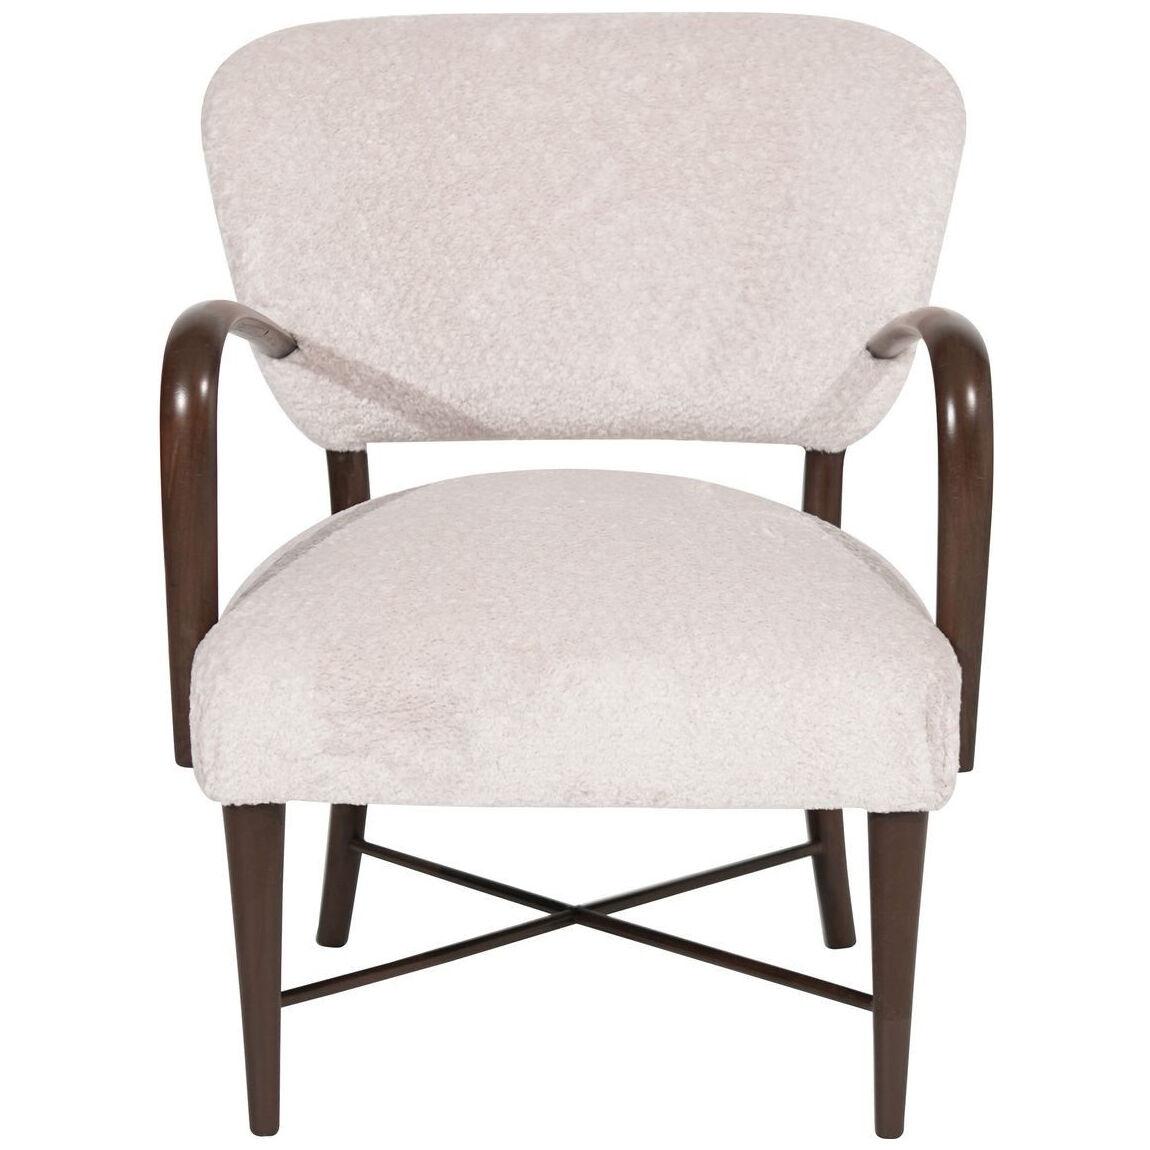 Italian Accent Chair in Wool, C. 1950s